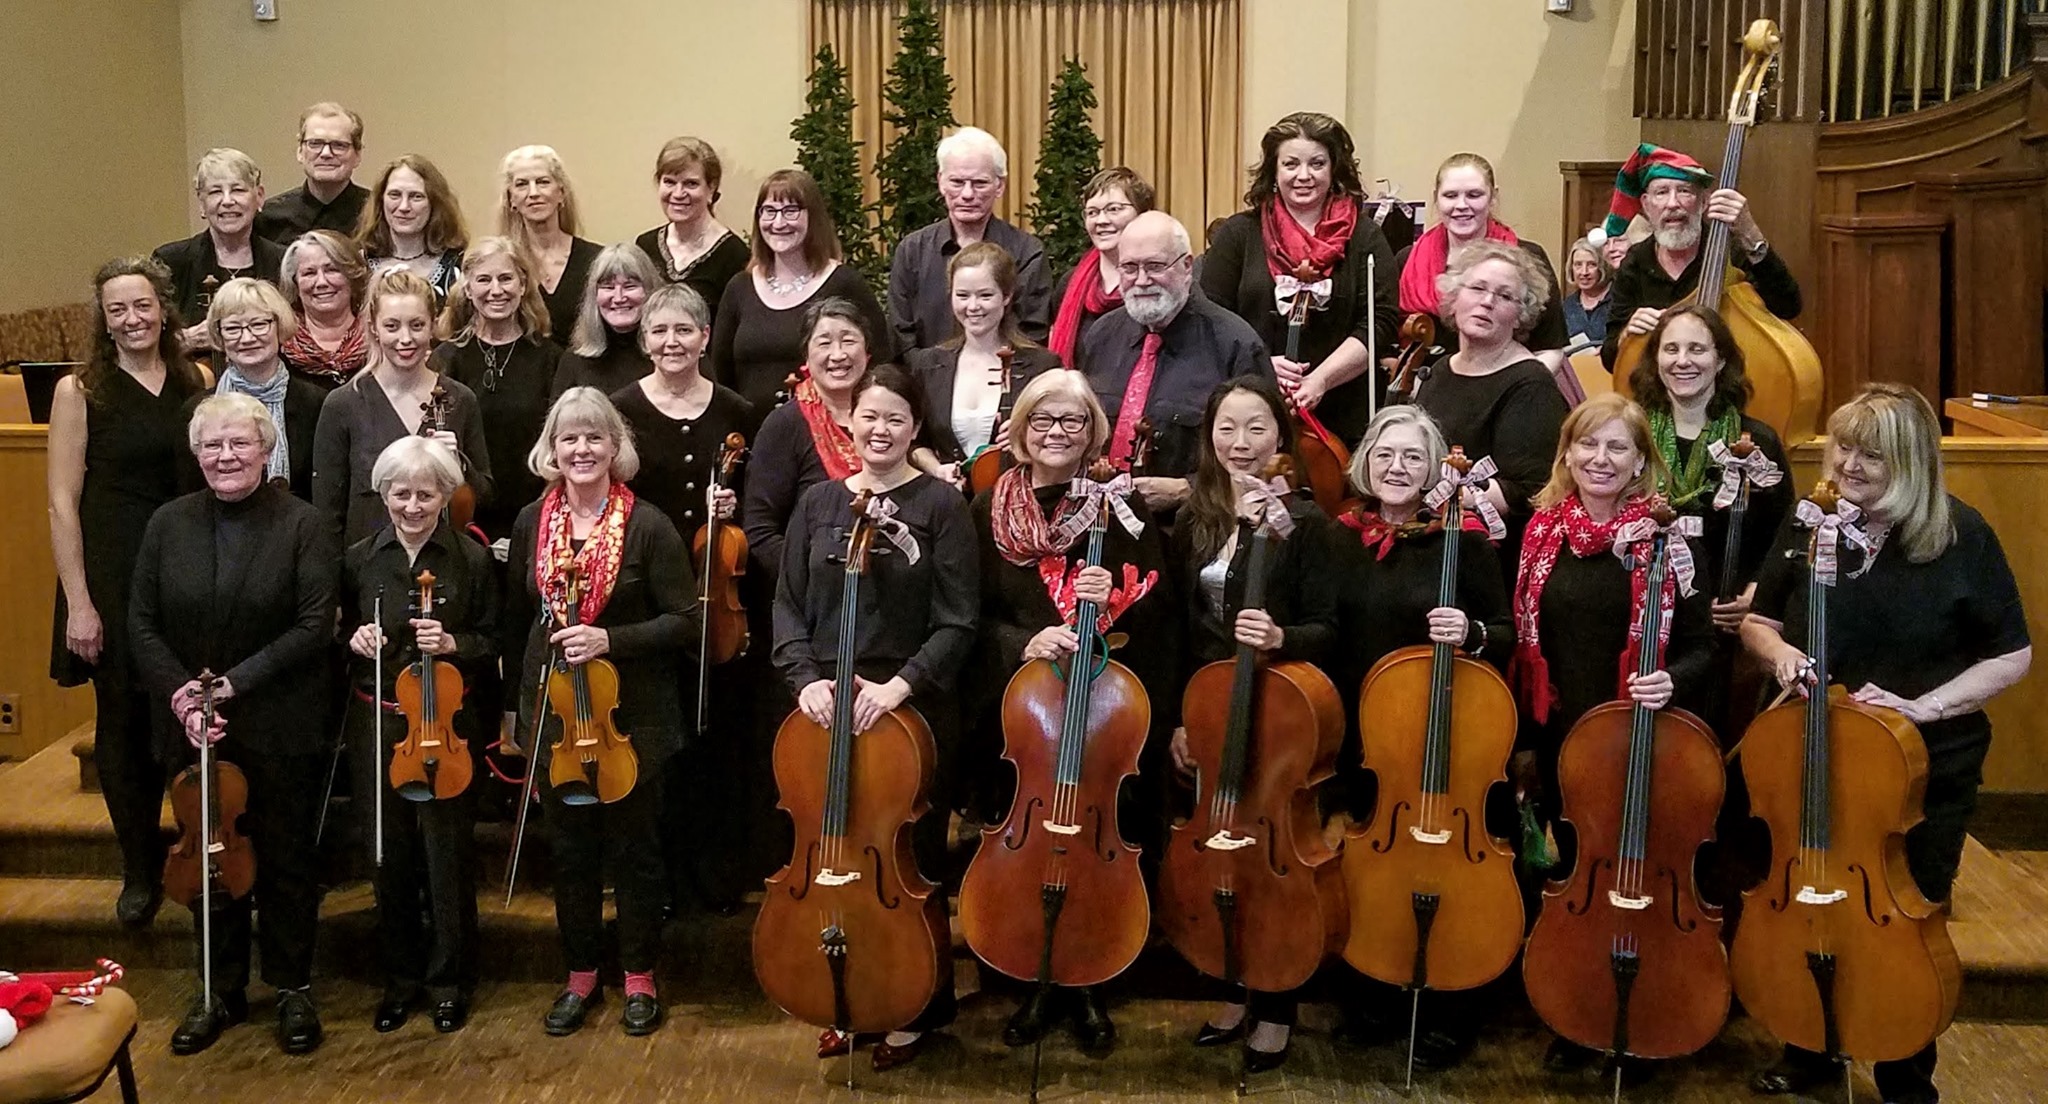 Photo of orchestra members in festive clothing.